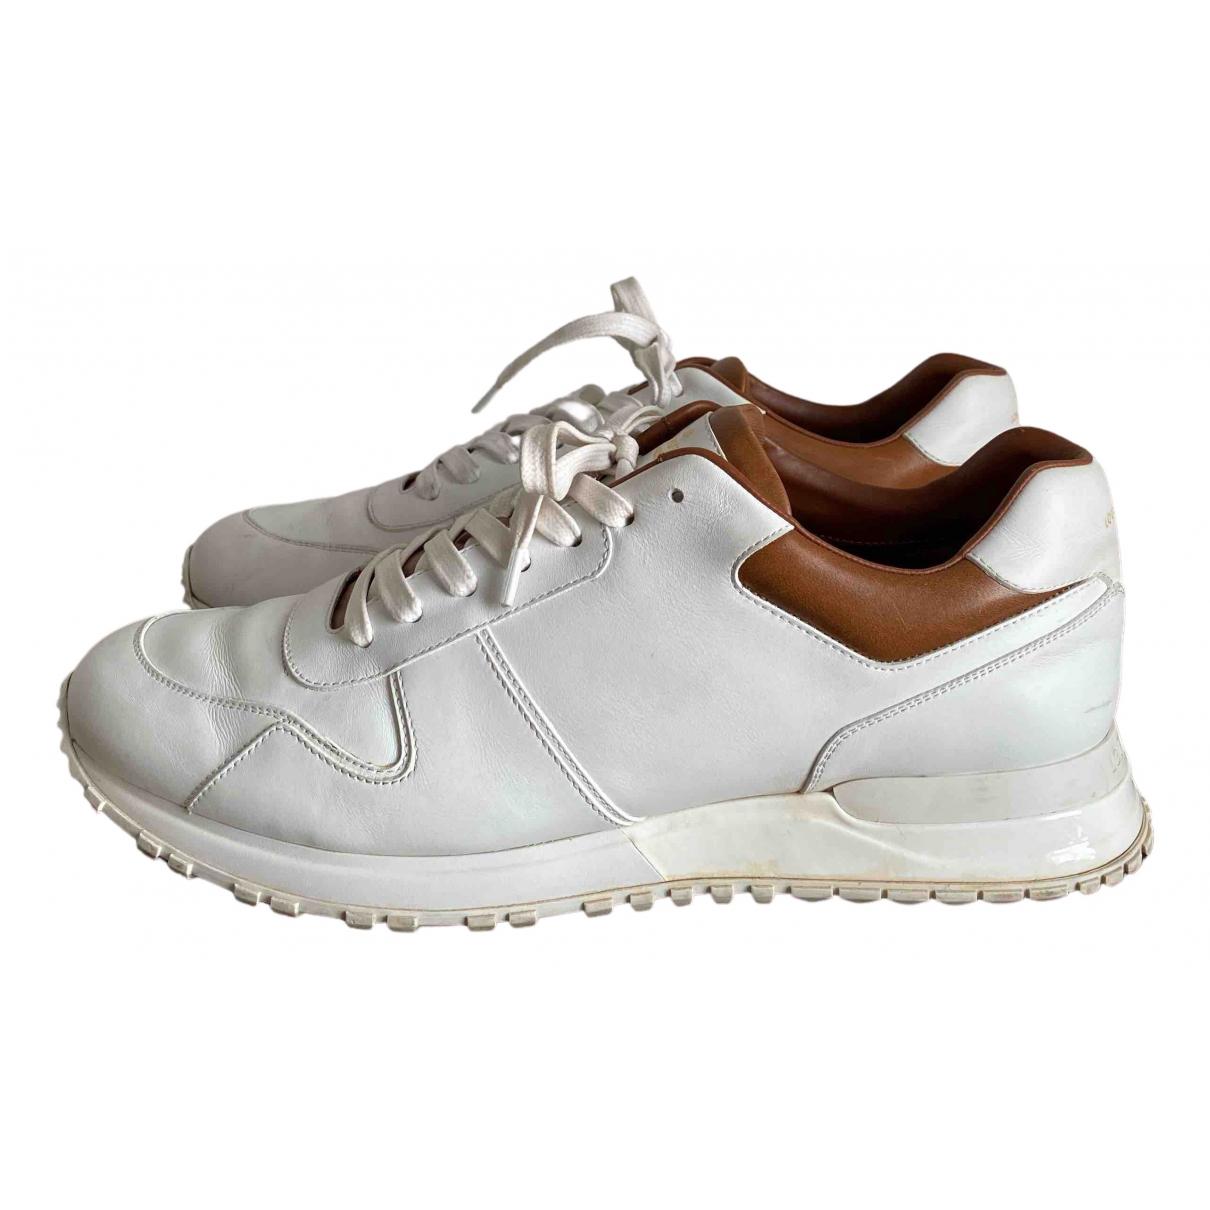 Louis Vuitton Run Away Leather Low Trainers in White for Men - Lyst